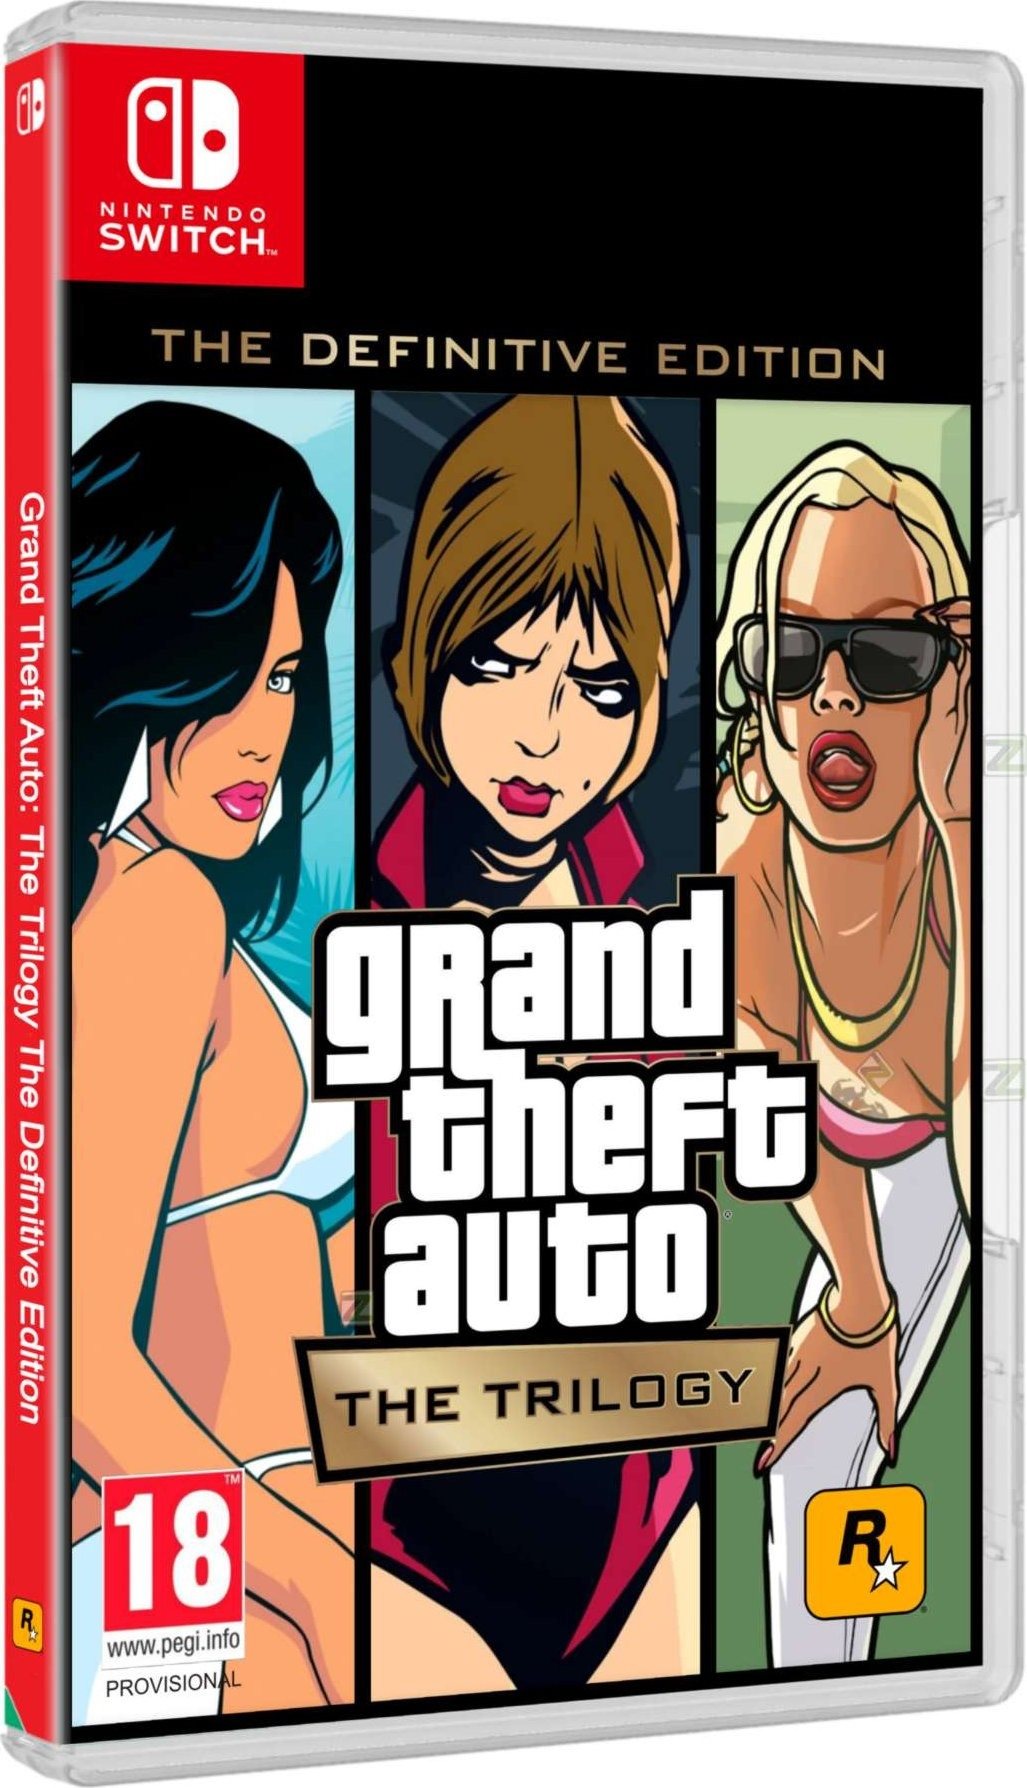 Grand Theft Auto: The Trilogy (GTA) - The Definitive Edition - Nintendo Switch